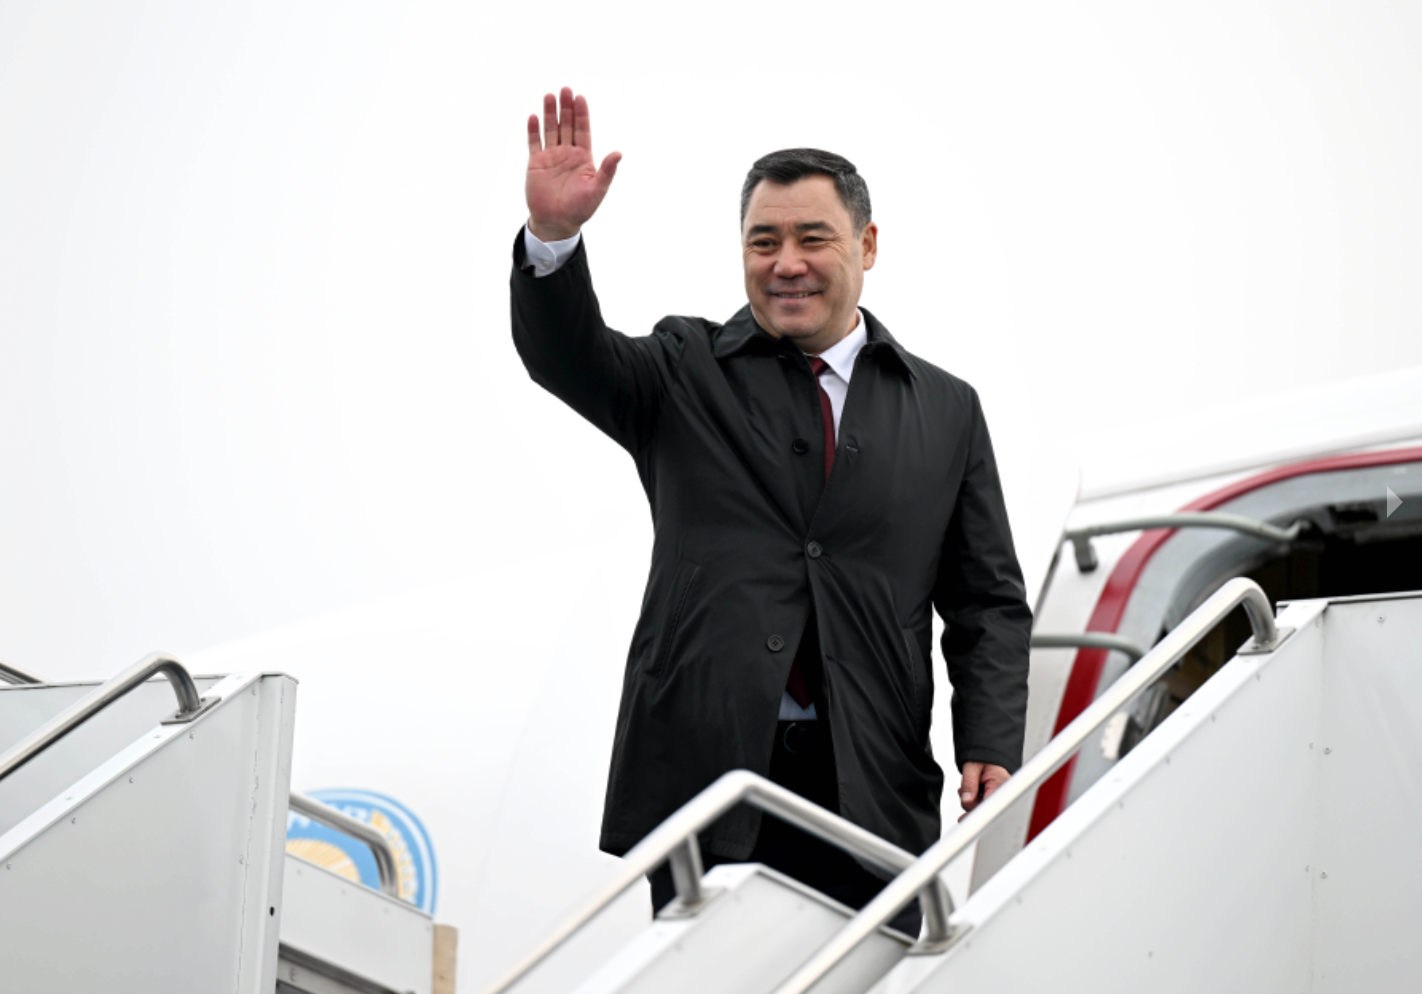 President of Kyrgyzstan, Sadyr Japarov charts diplomatic course to France, paving way for environmental and economic alliances 